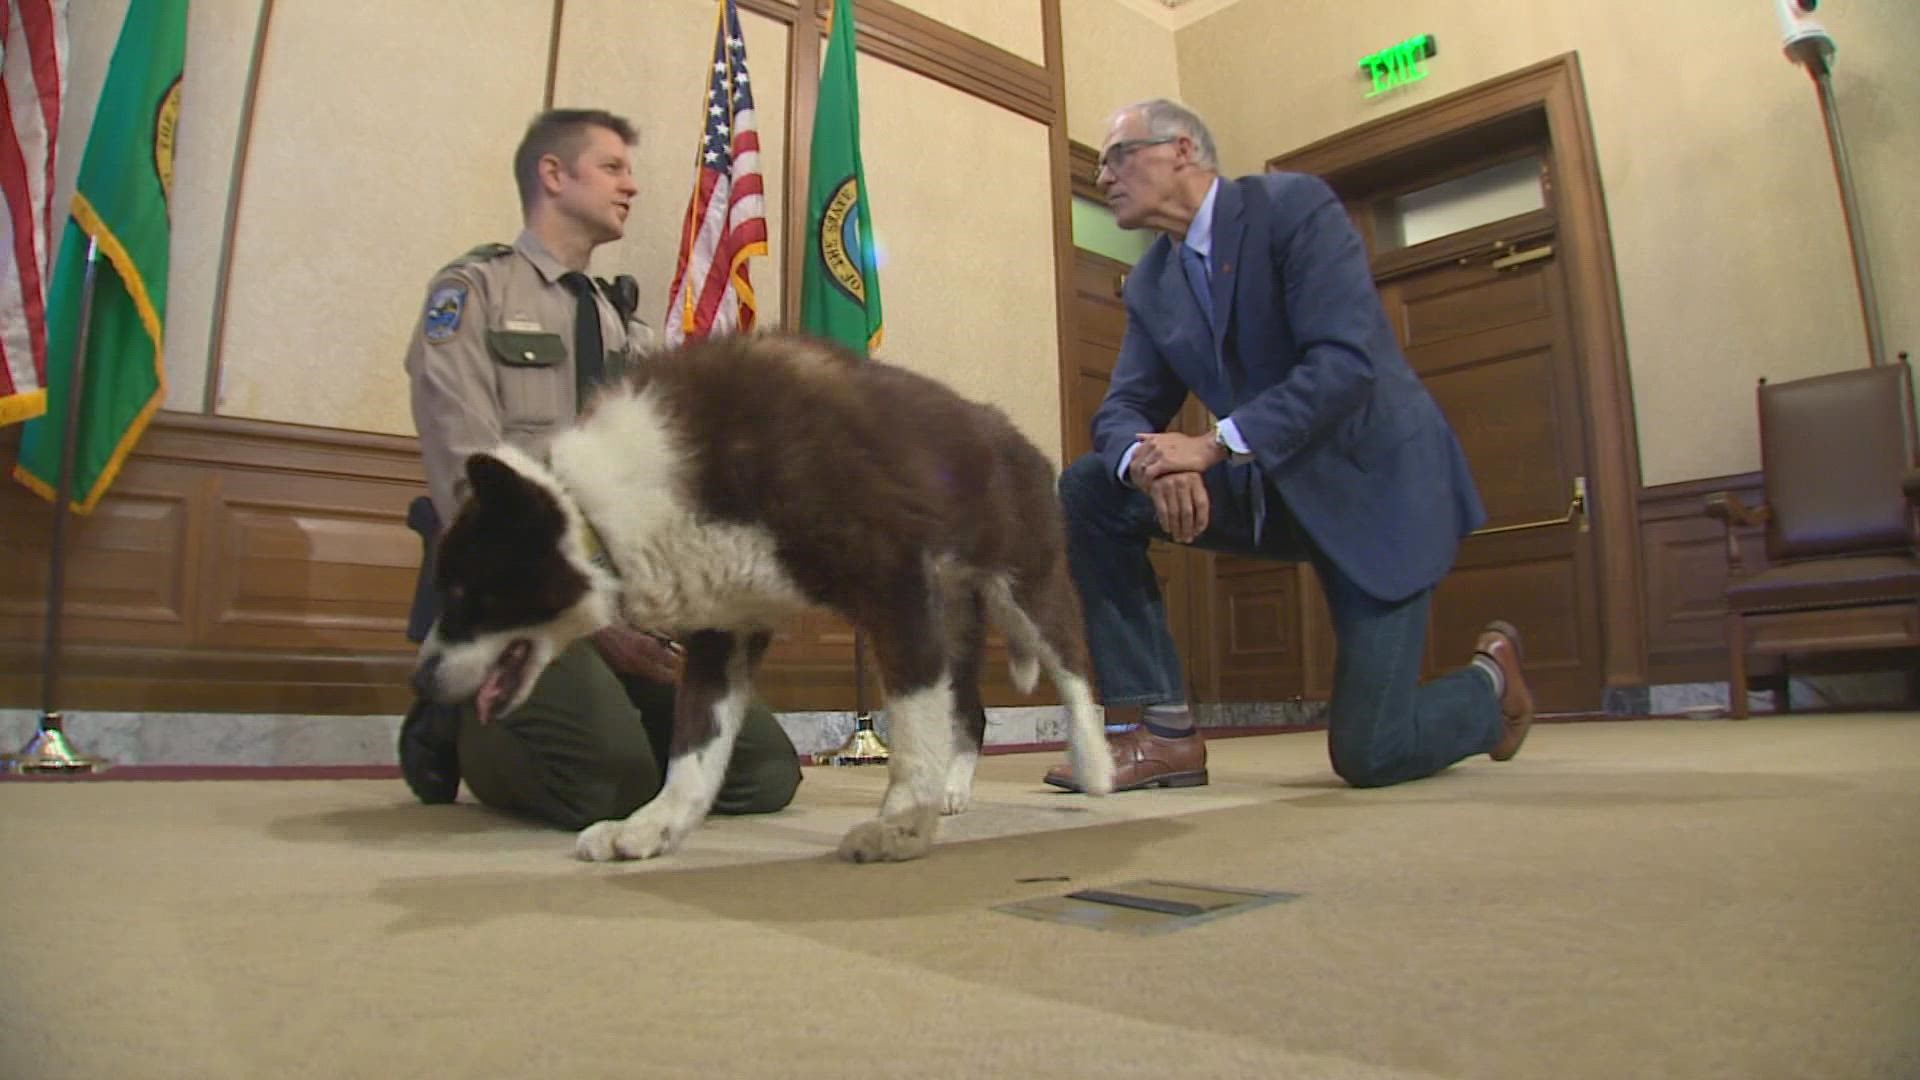 K9 Colter, a Karelian bear dog, has served the Washington State Department of Fish and Wildlife for 14 years.